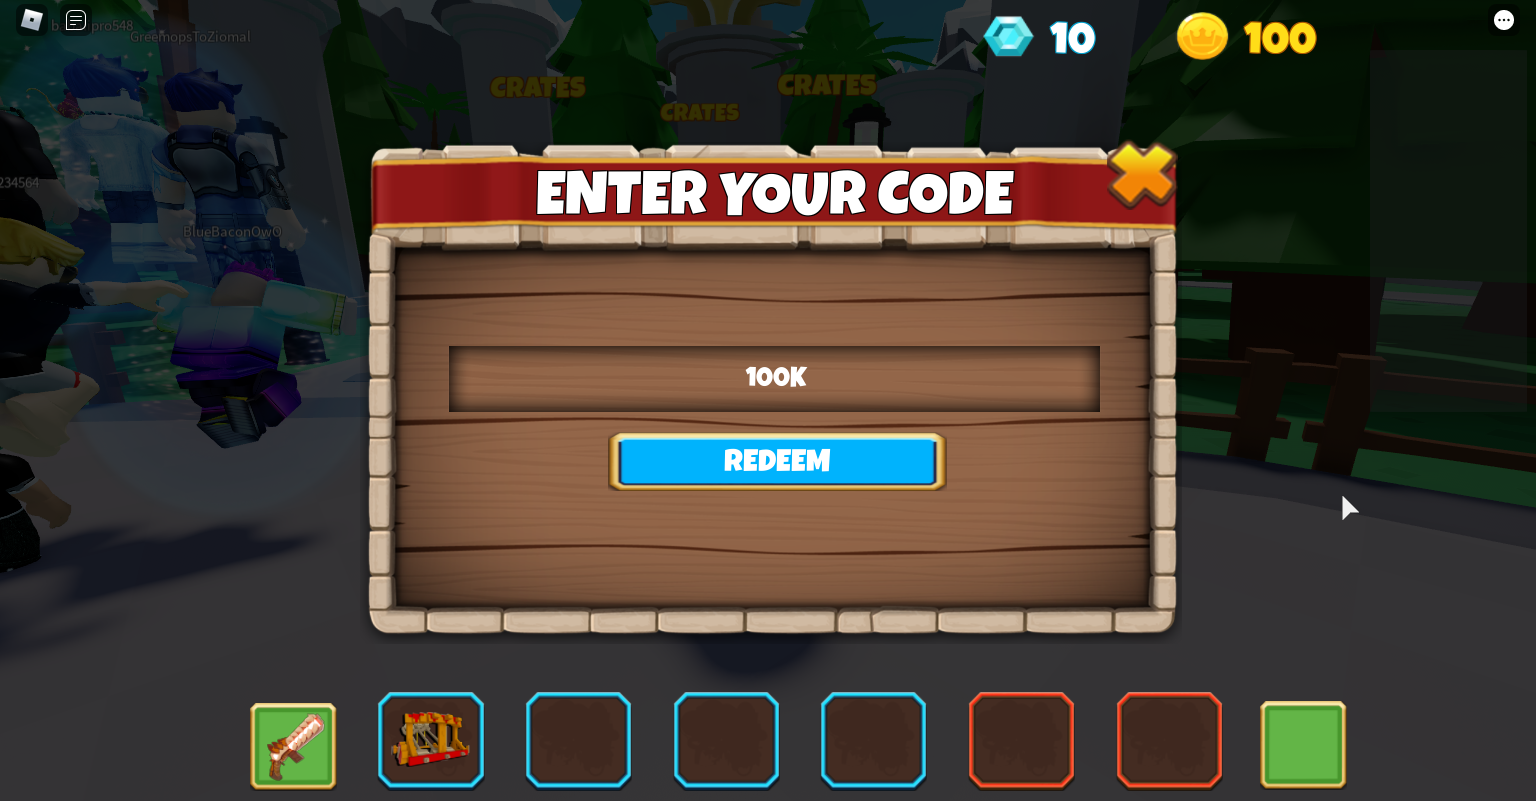 World Defenders Codes on